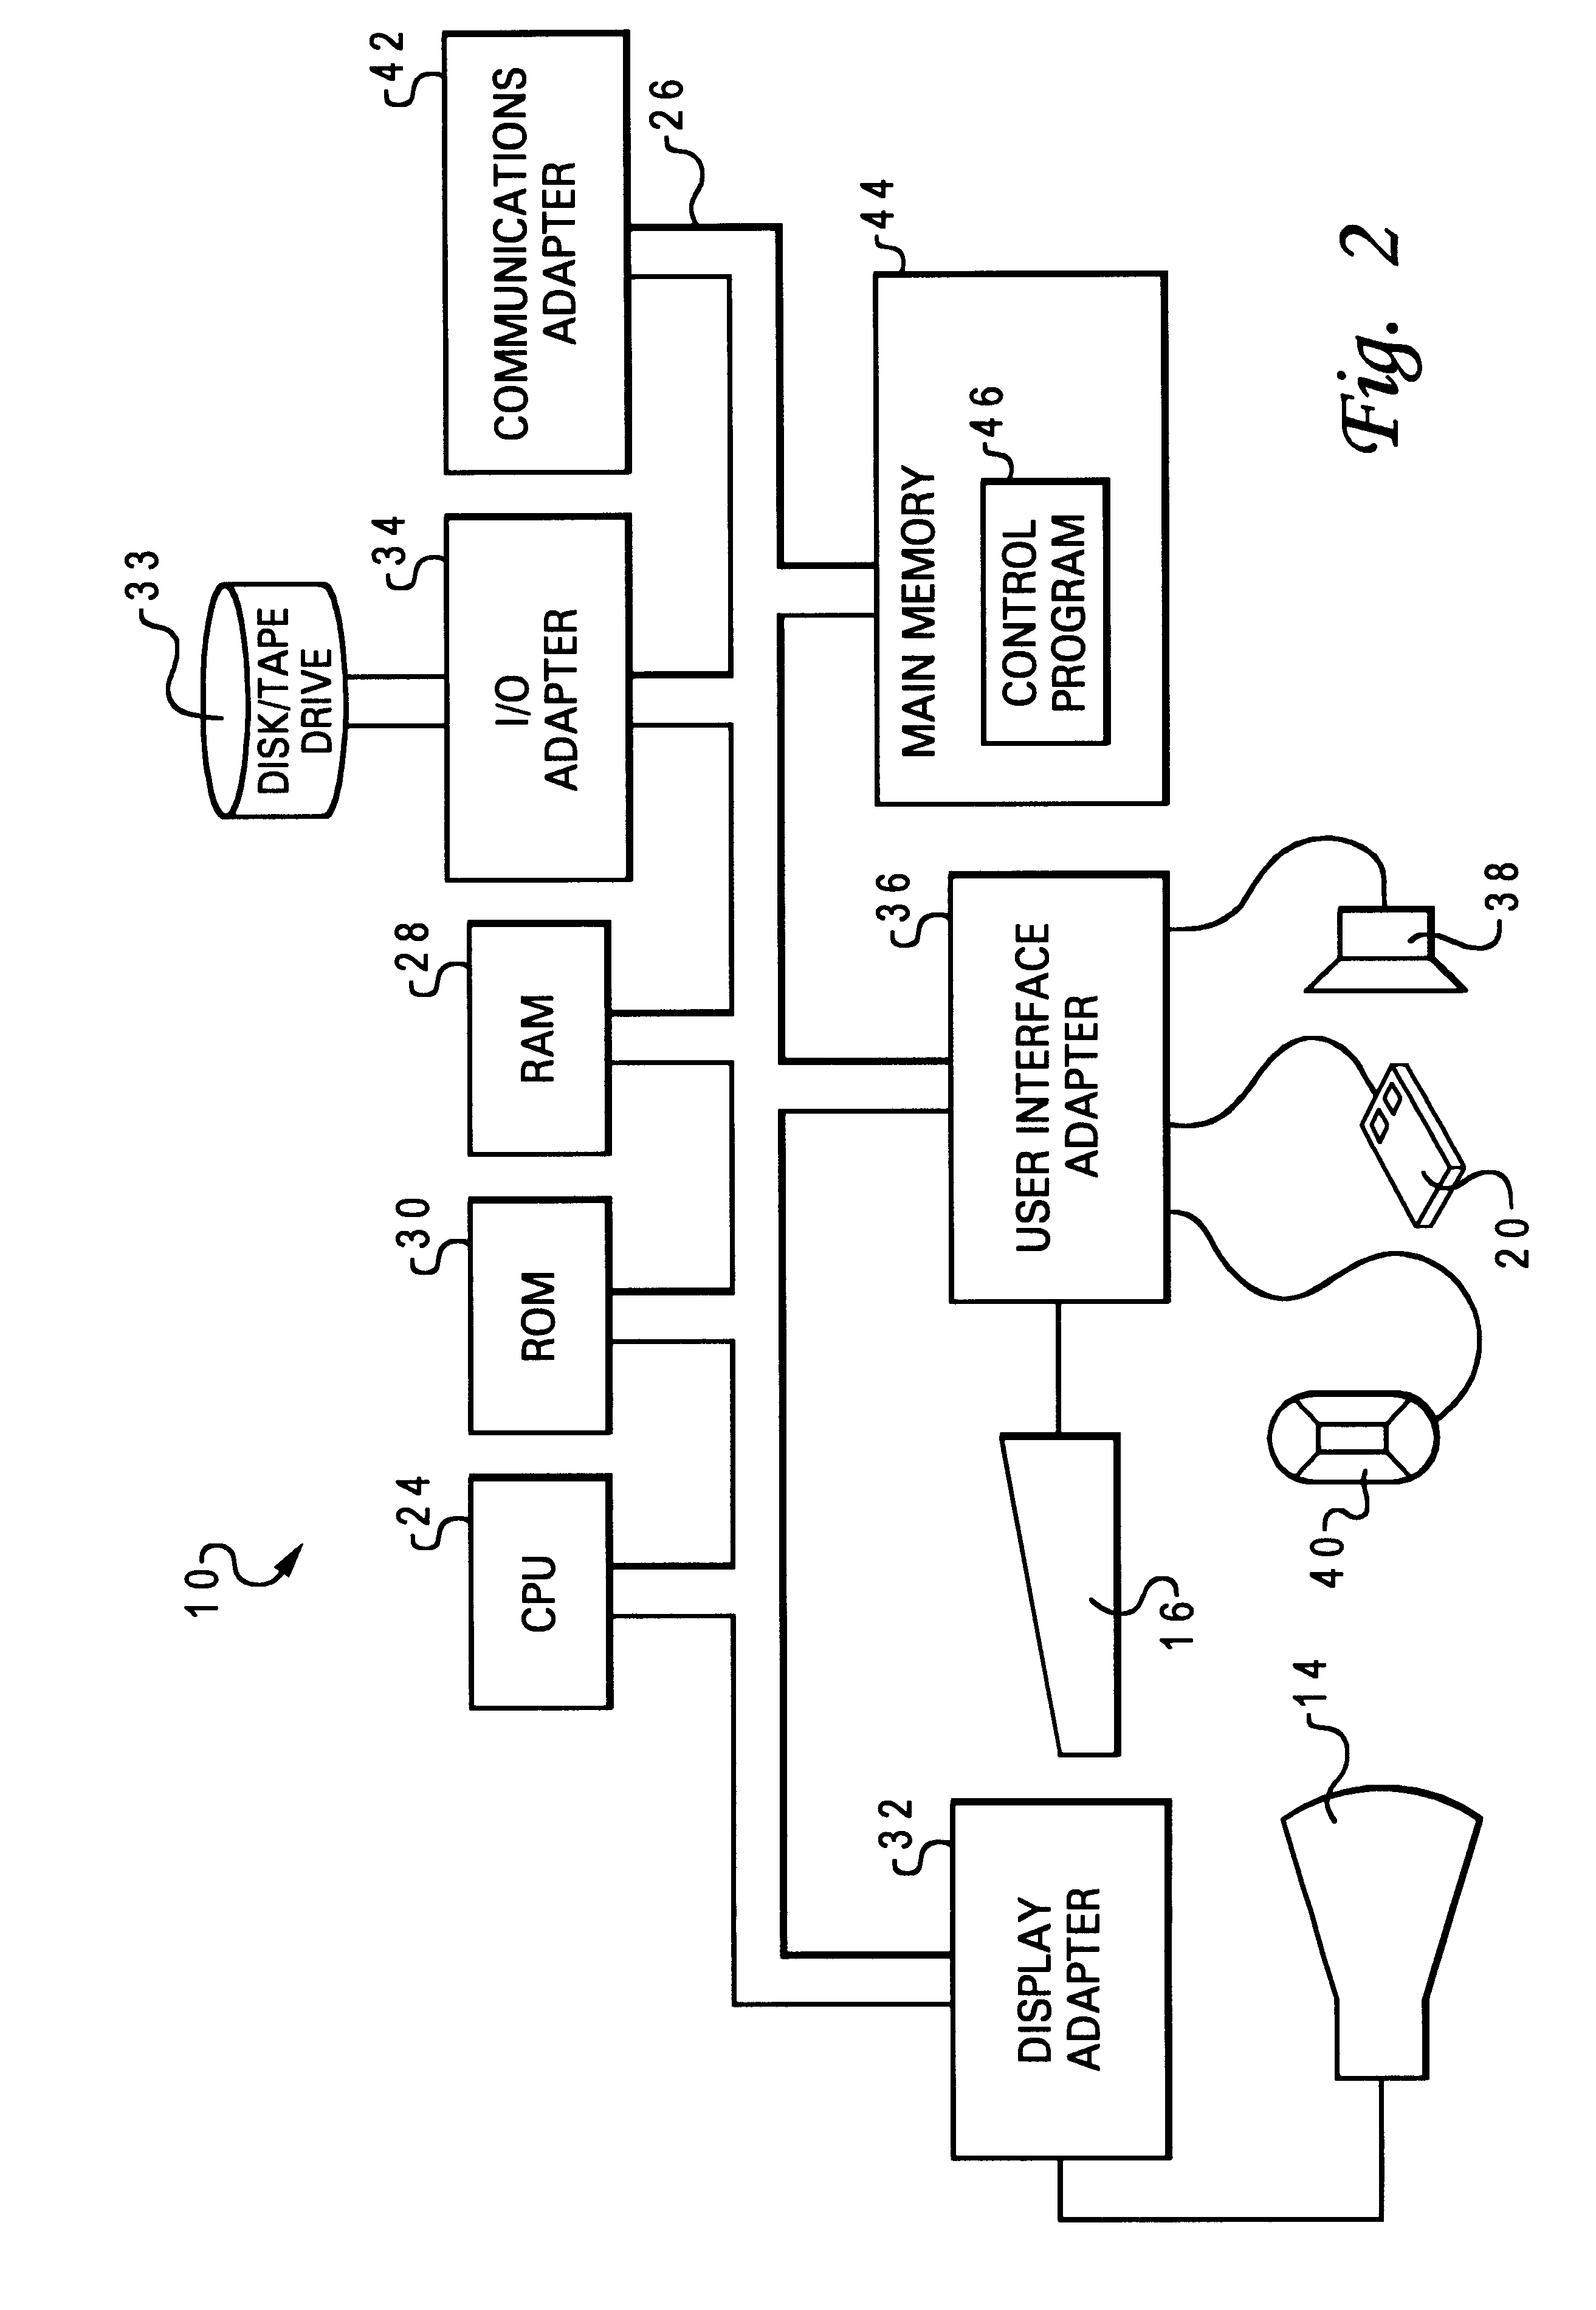 Method and system for selectively disabling simulation model instrumentation